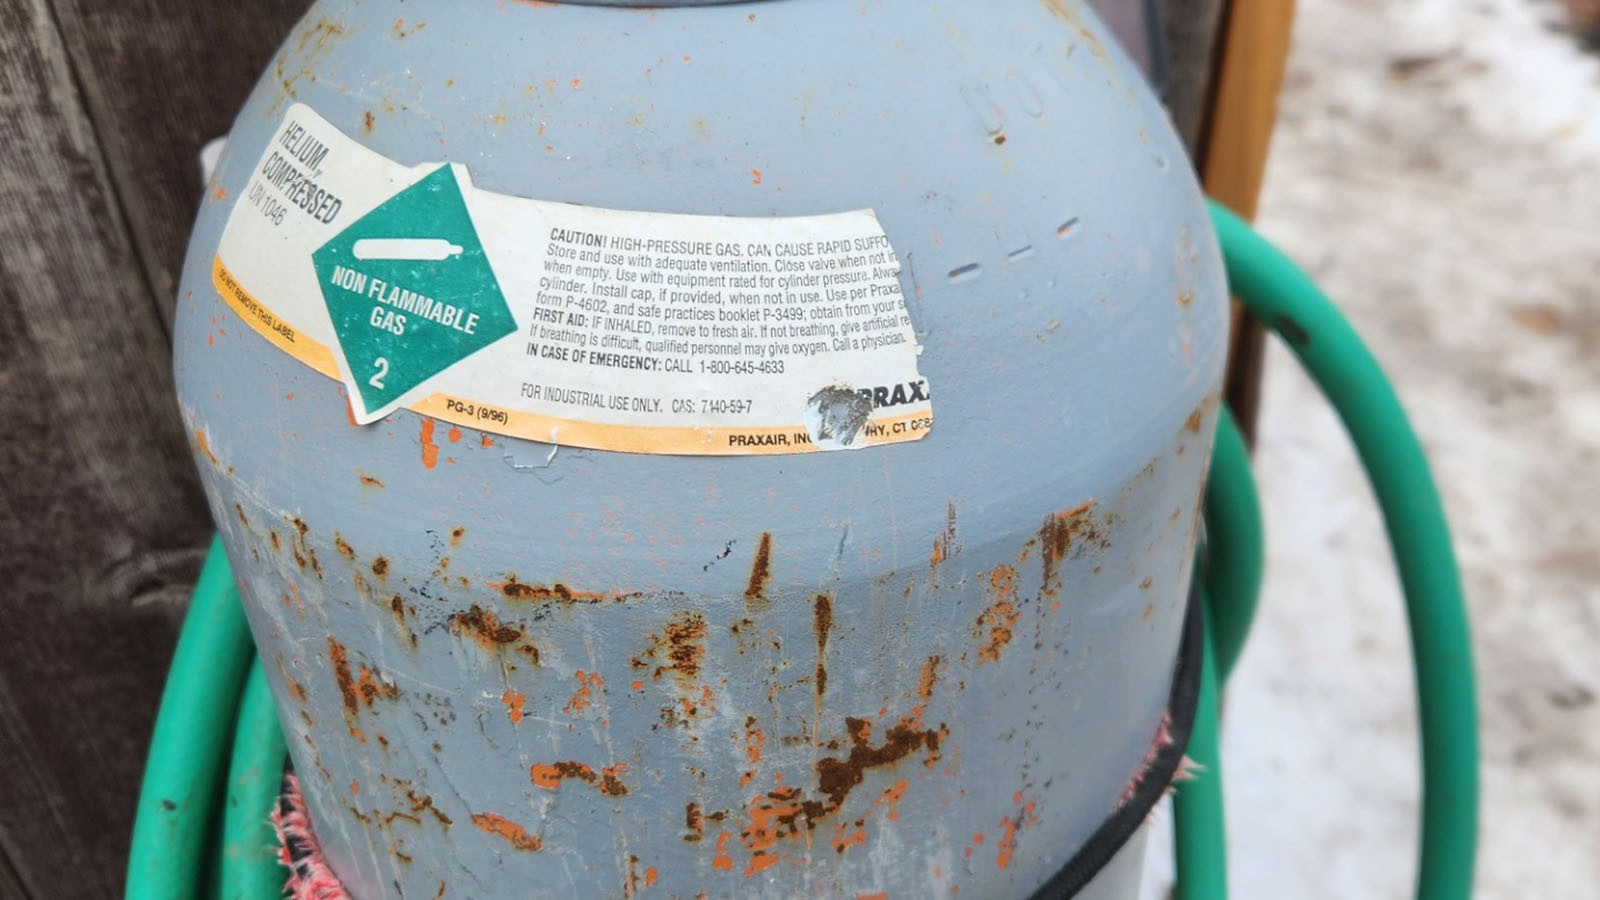 A helium tank that was mention in a citation for having an unruly property.